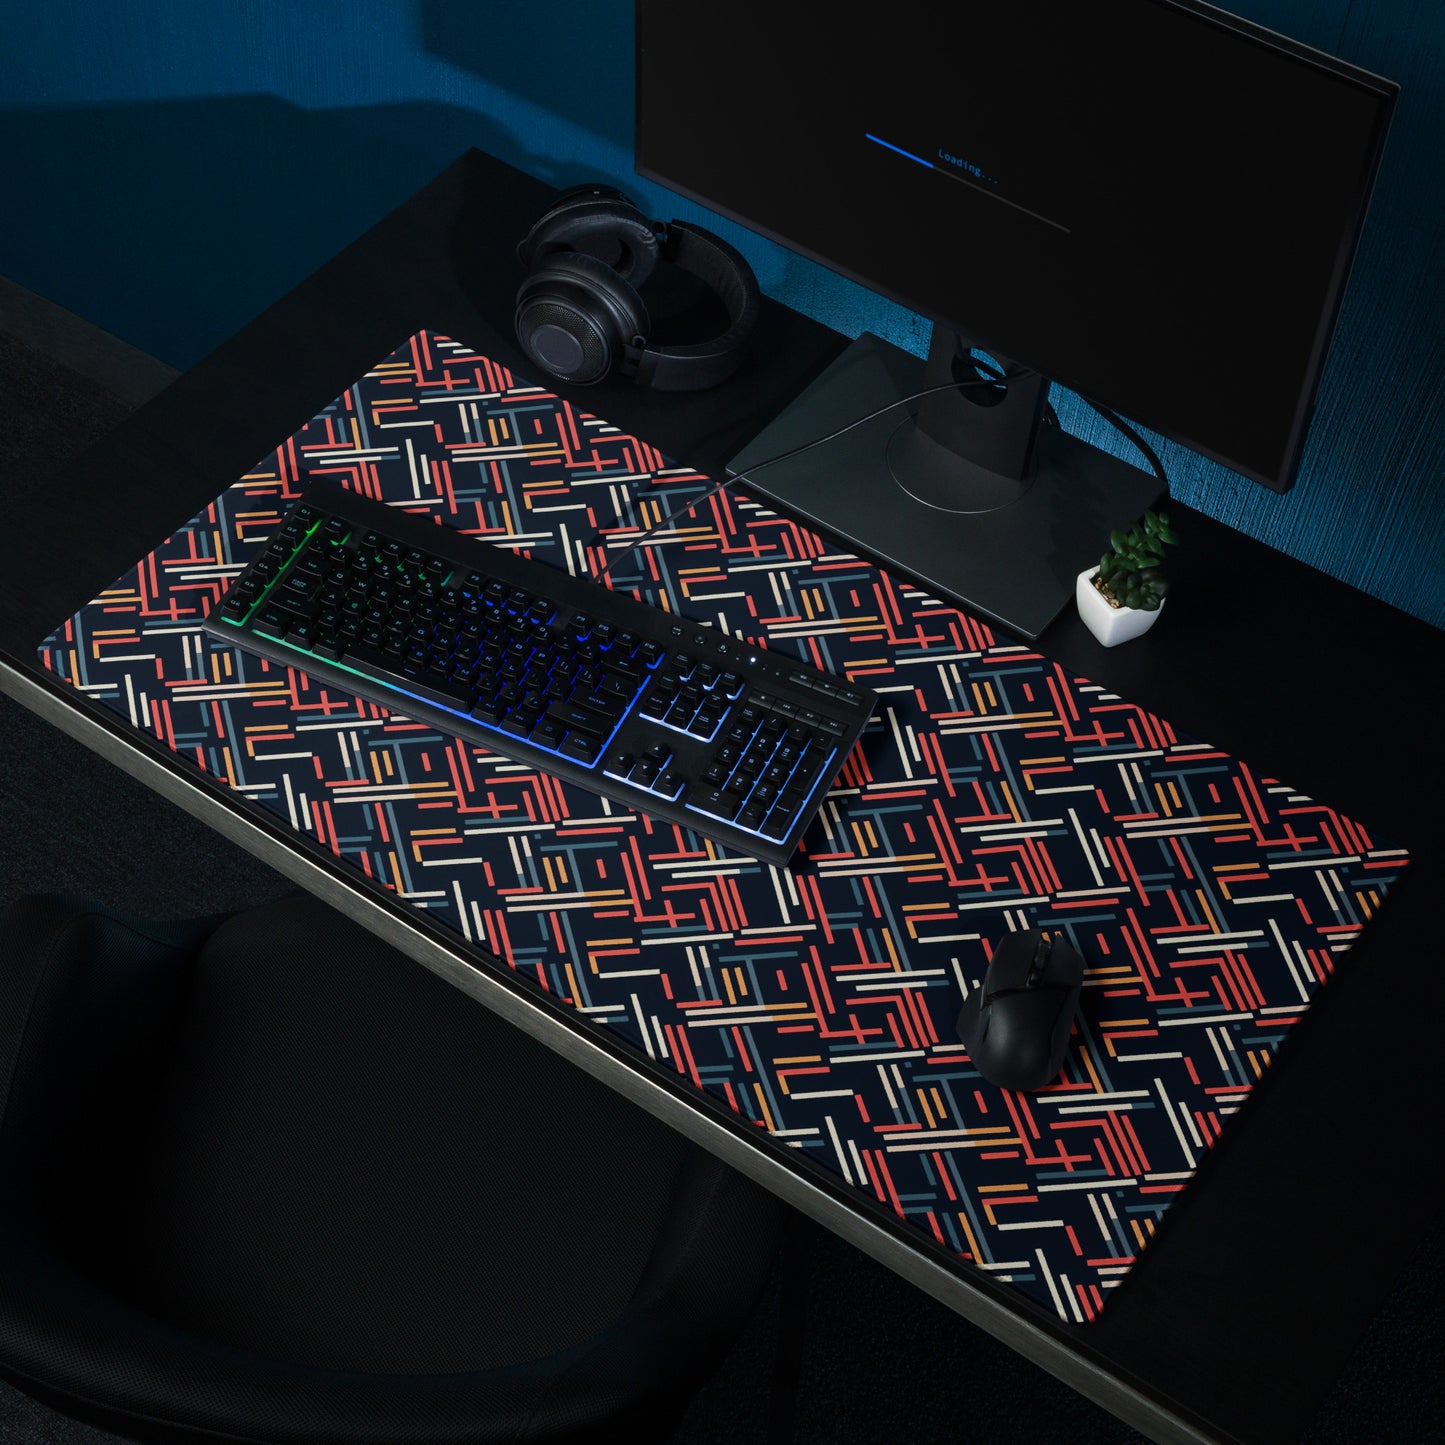 A 36" x 18" gaming desk pad with red, blue, white, and orange lines on a black background. It sits on a black desk with a monitor, keyboard, and mouse.